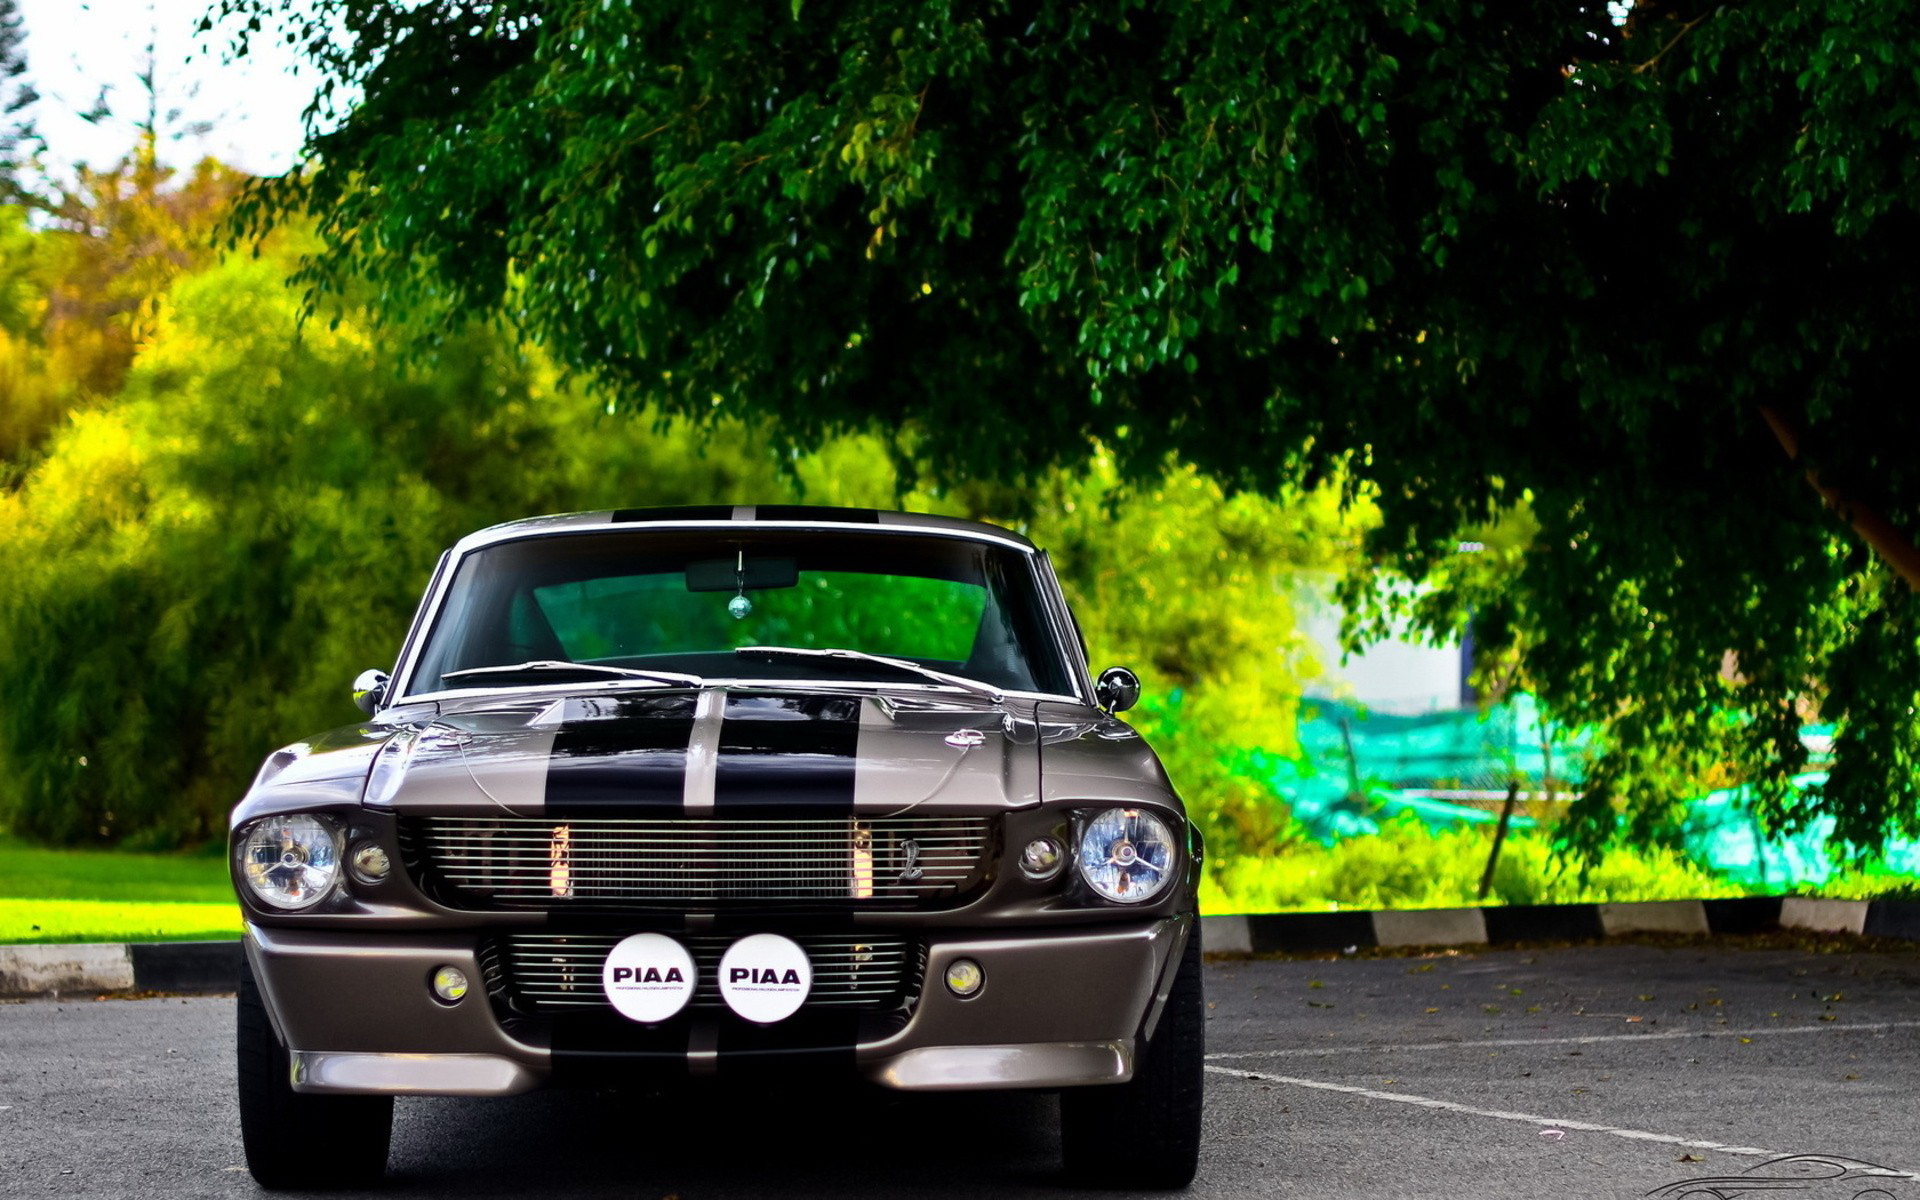 HQ Ford Mustang Gt500 Background